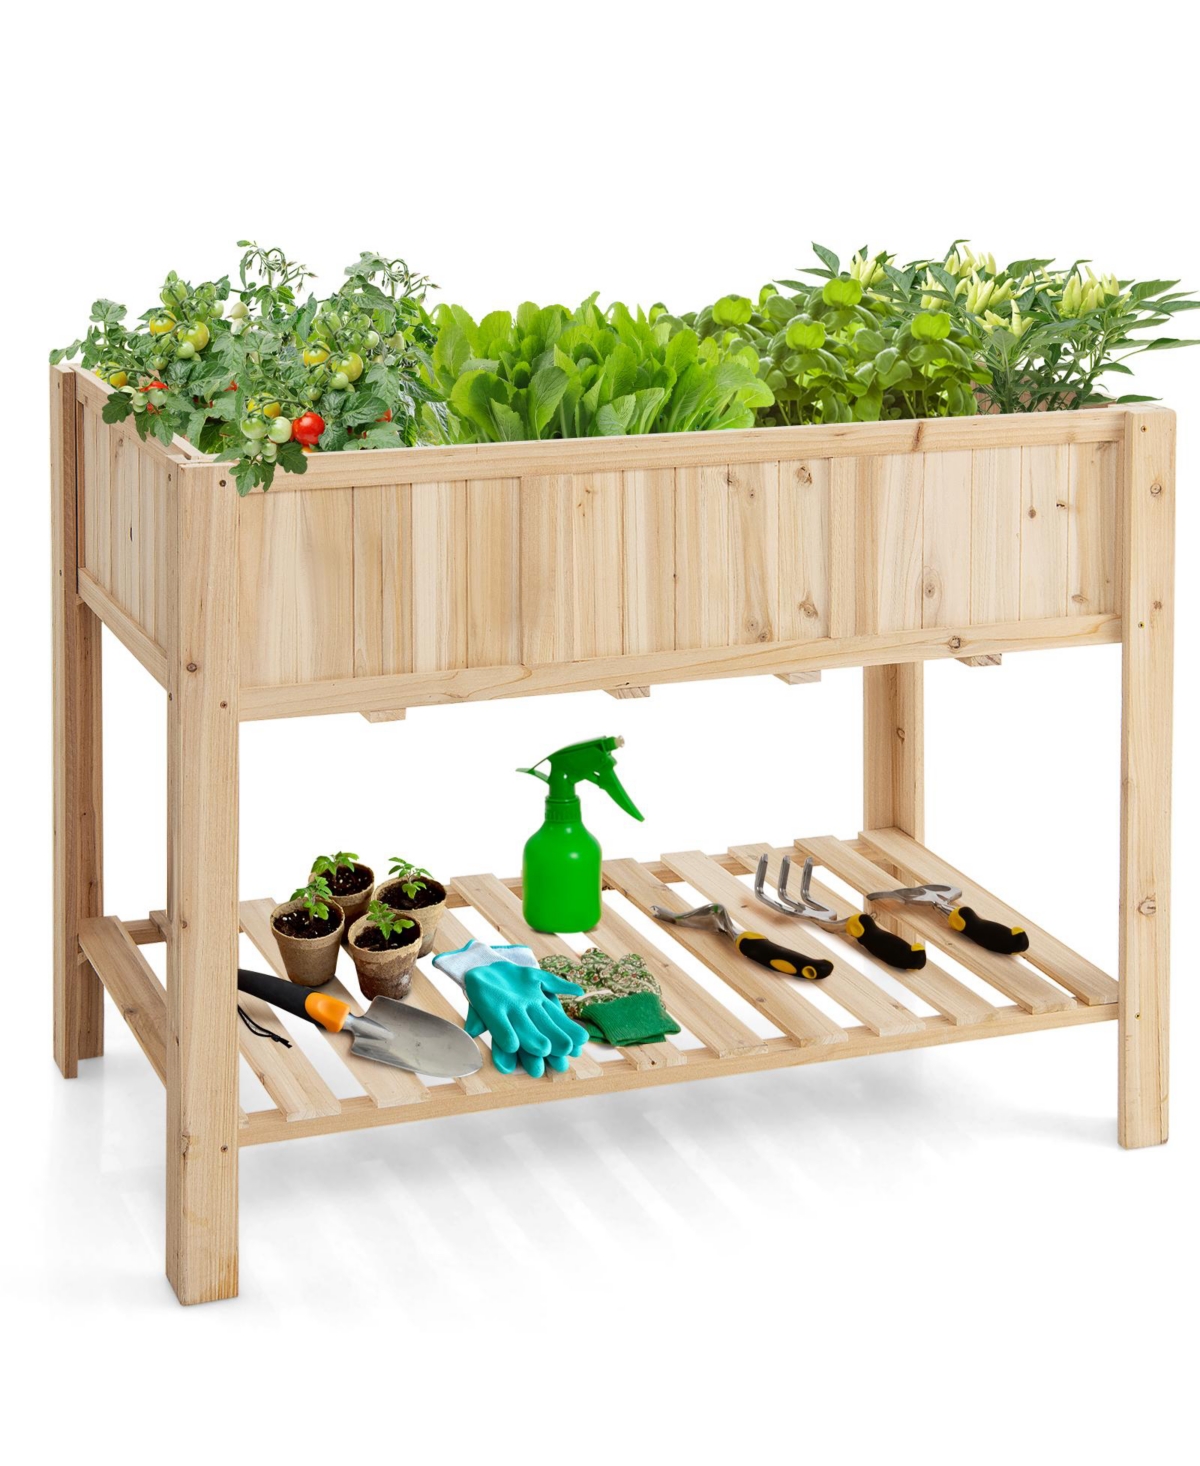 47 Inch Wooden Raised Garden Bed with Bottom Shelf and Bed Liner - Natural